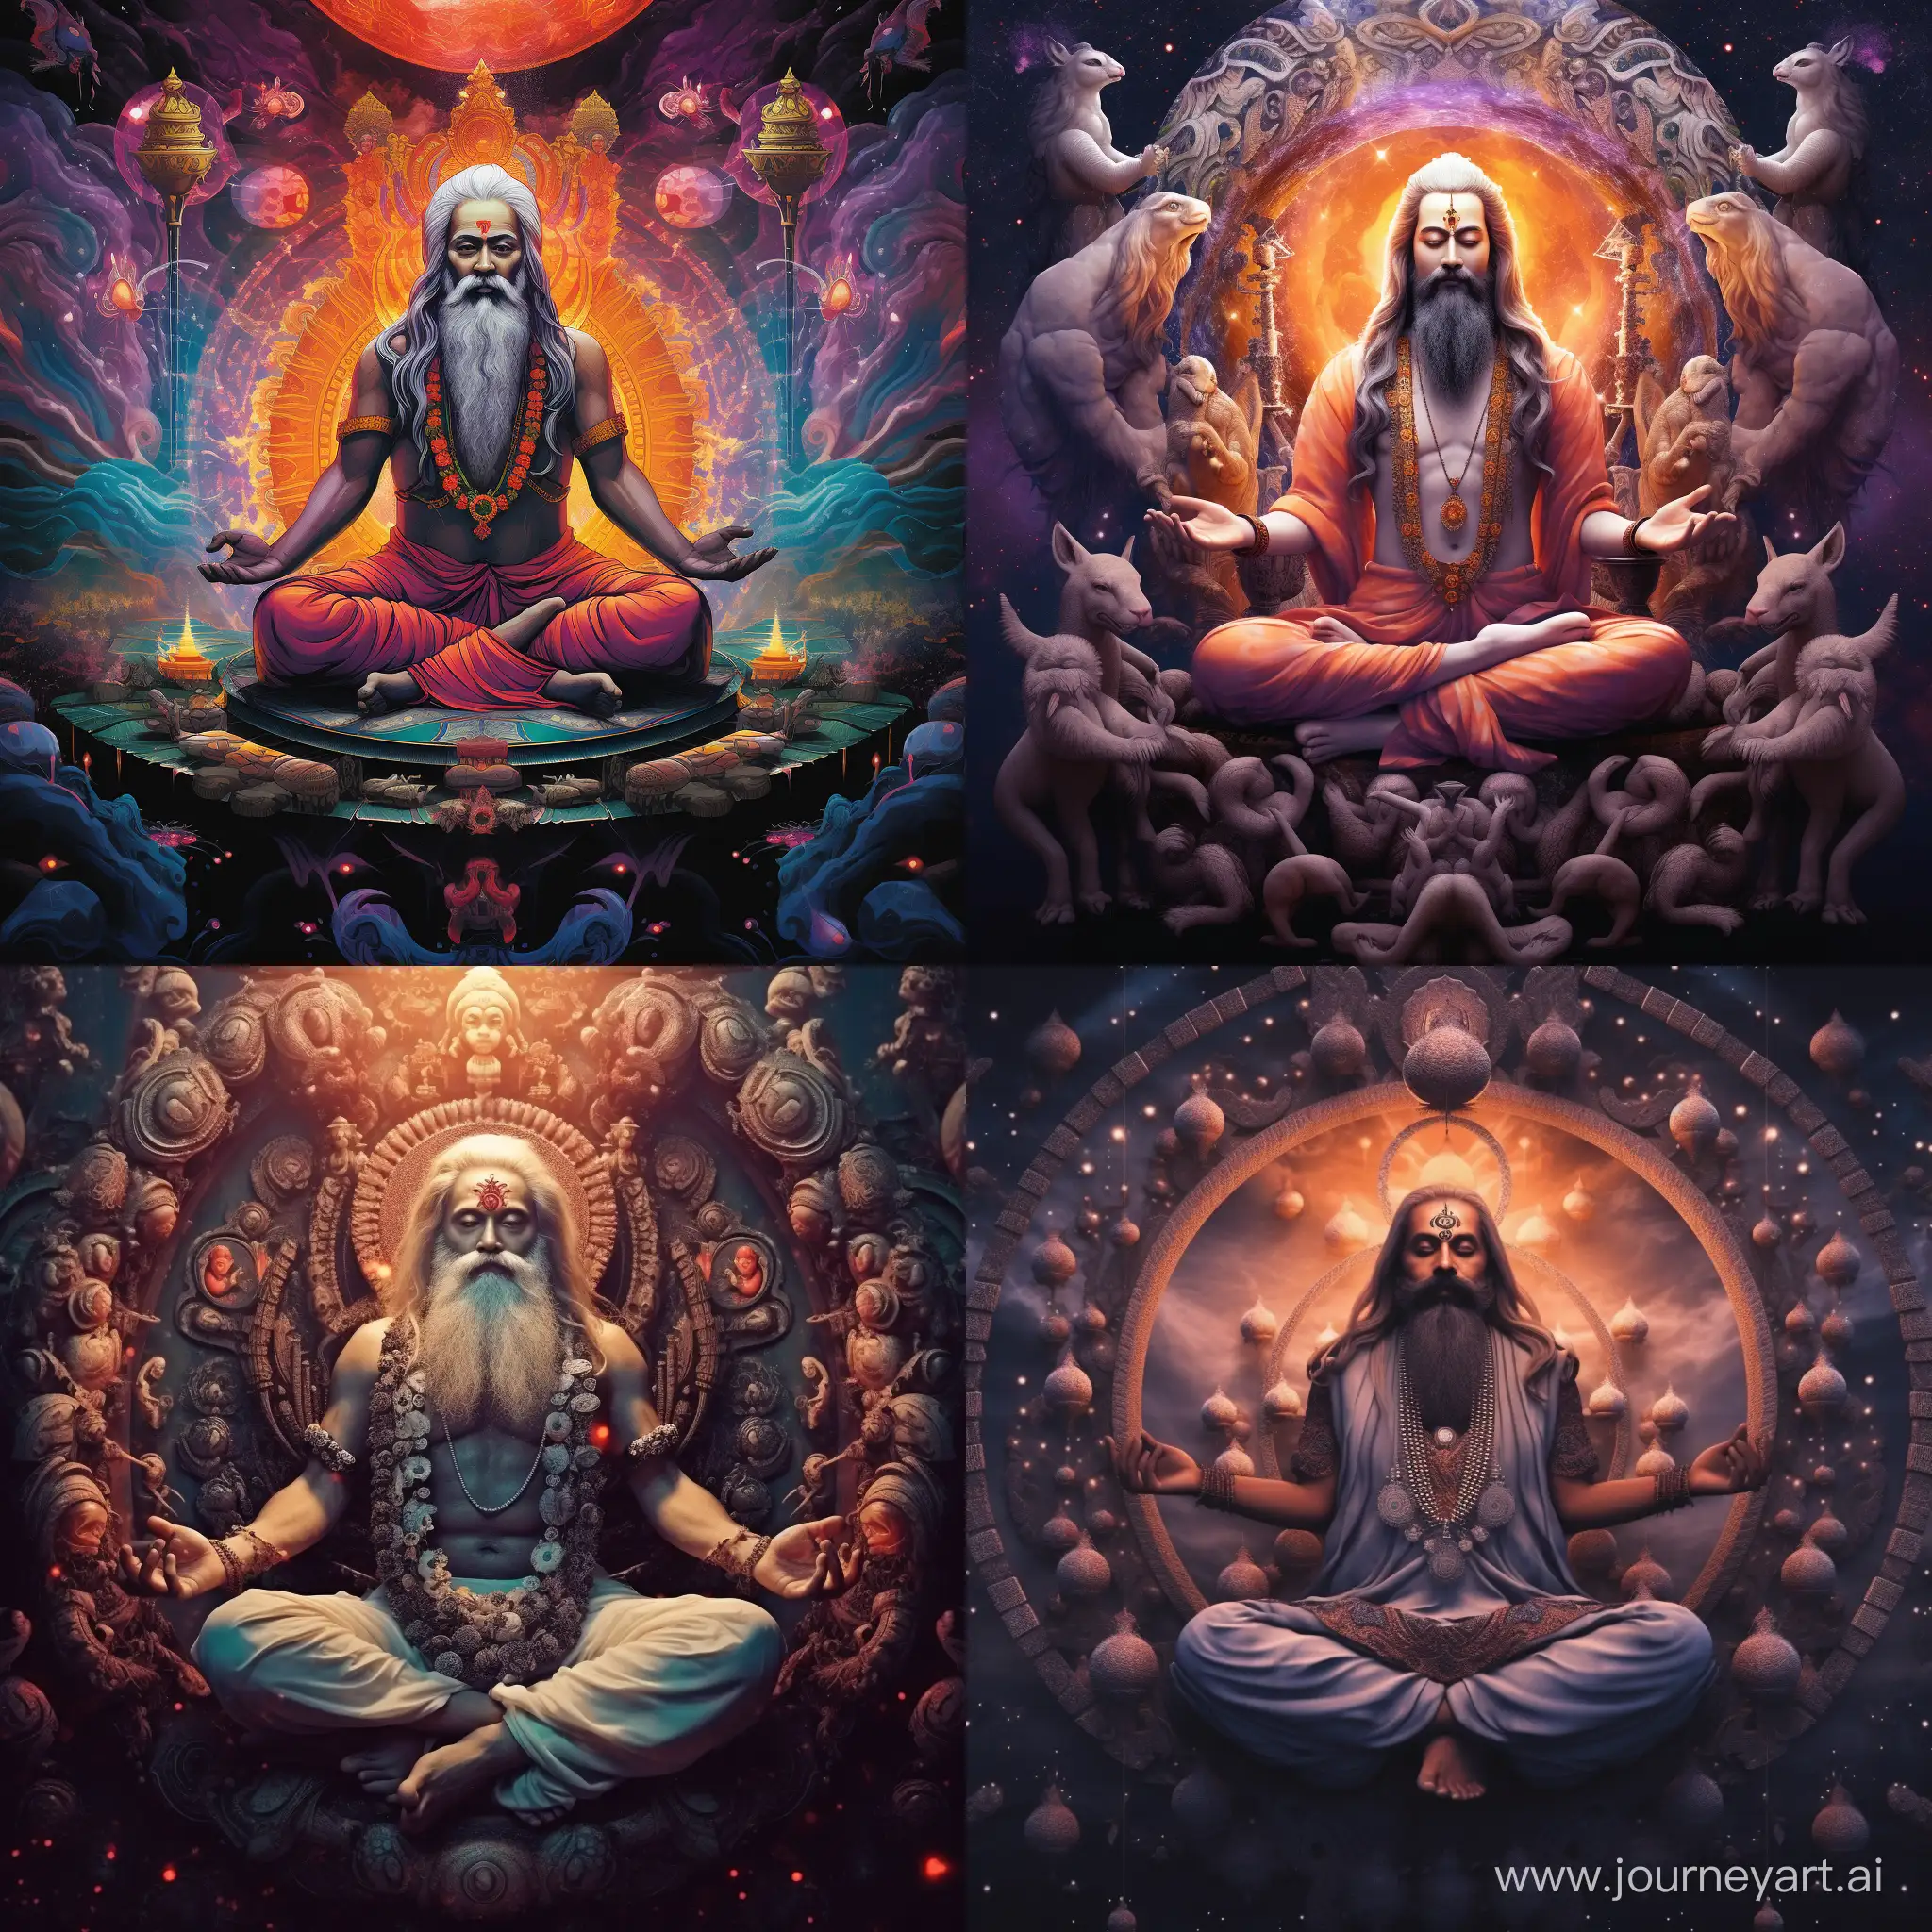 Mystical-Depiction-of-Hindu-God-Brahma-in-Cosmic-Setting-with-Four-Arms